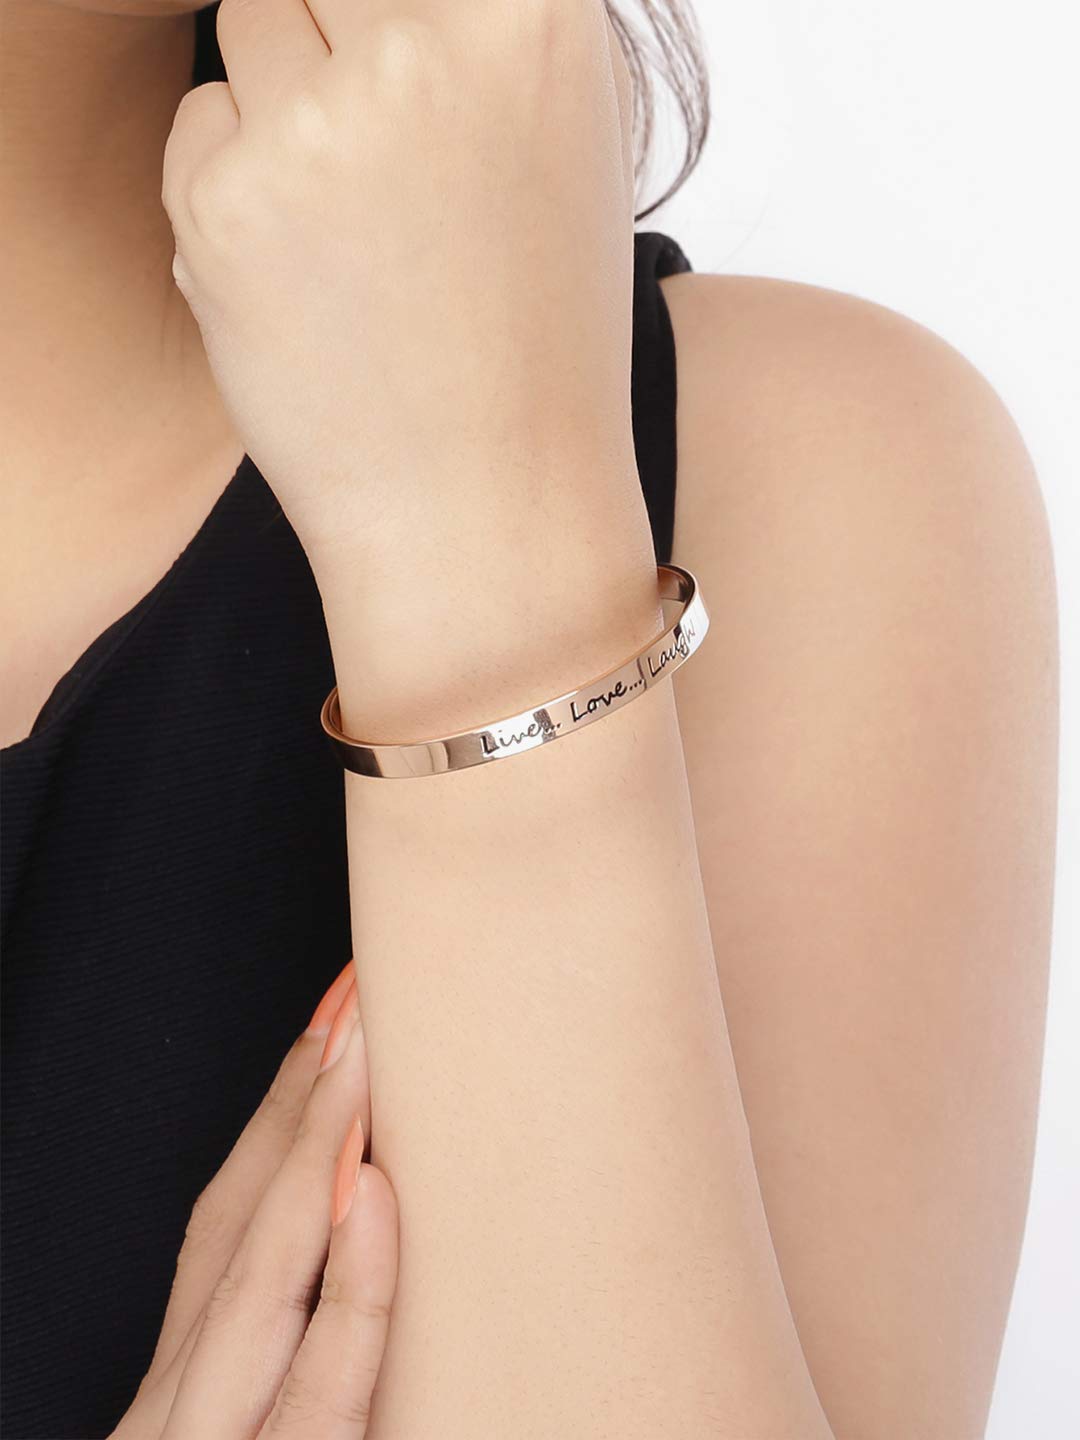 Buy De-Ultimate Adjustable Metal I Love You Magnetic Valentines Day Forever  Matching Broken Heart Shape Love Couples Friendship Promise Wrist Band Cuff  Dori Rope Bracelet at Amazon.in